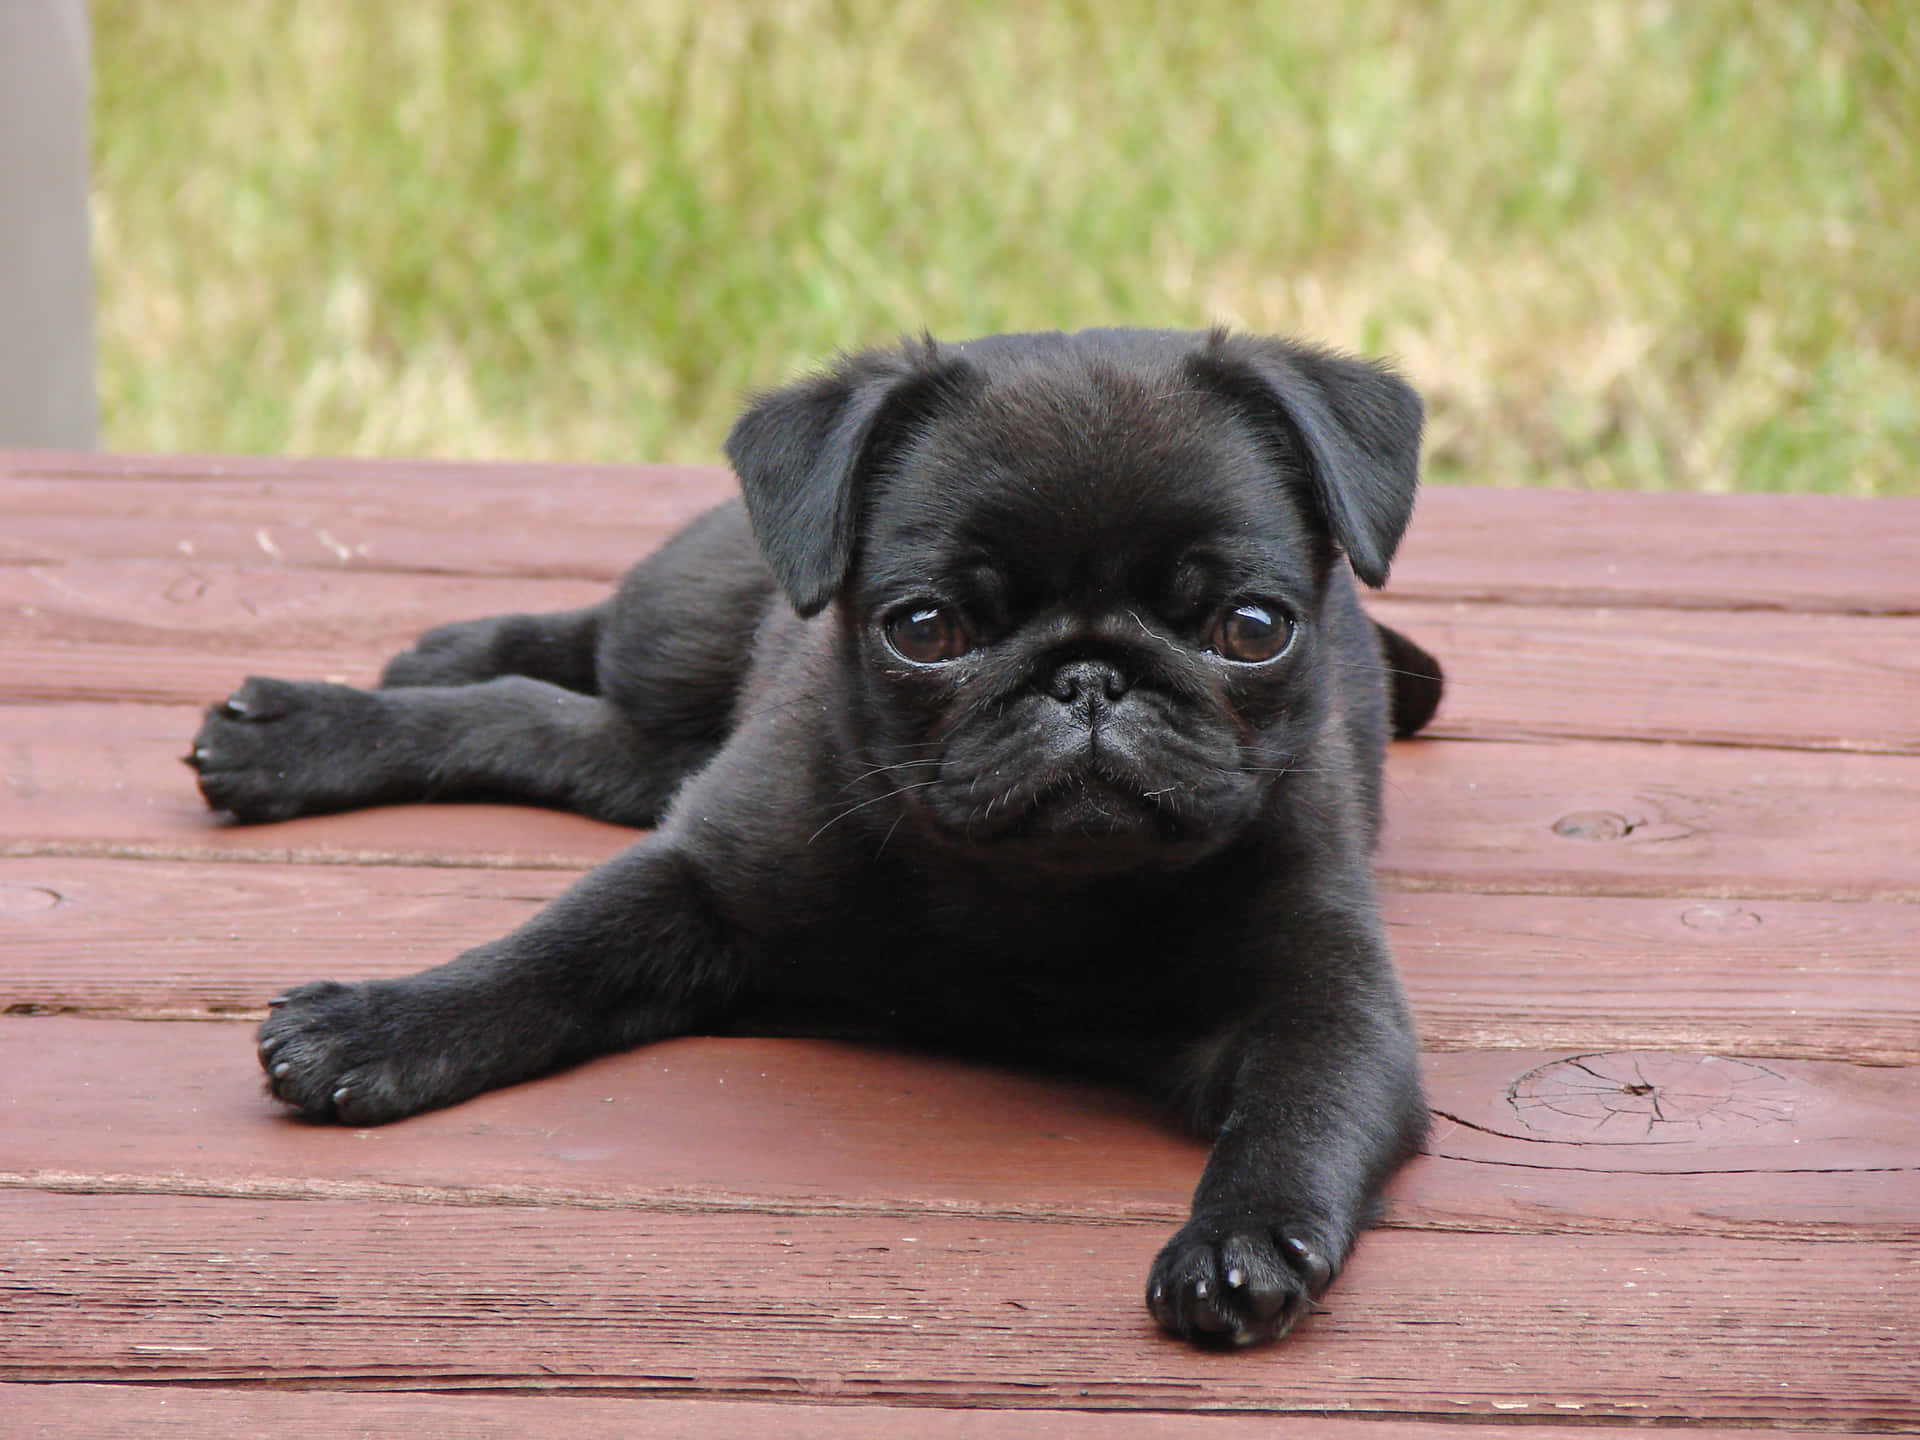 Cute Baby Black Pug Picture